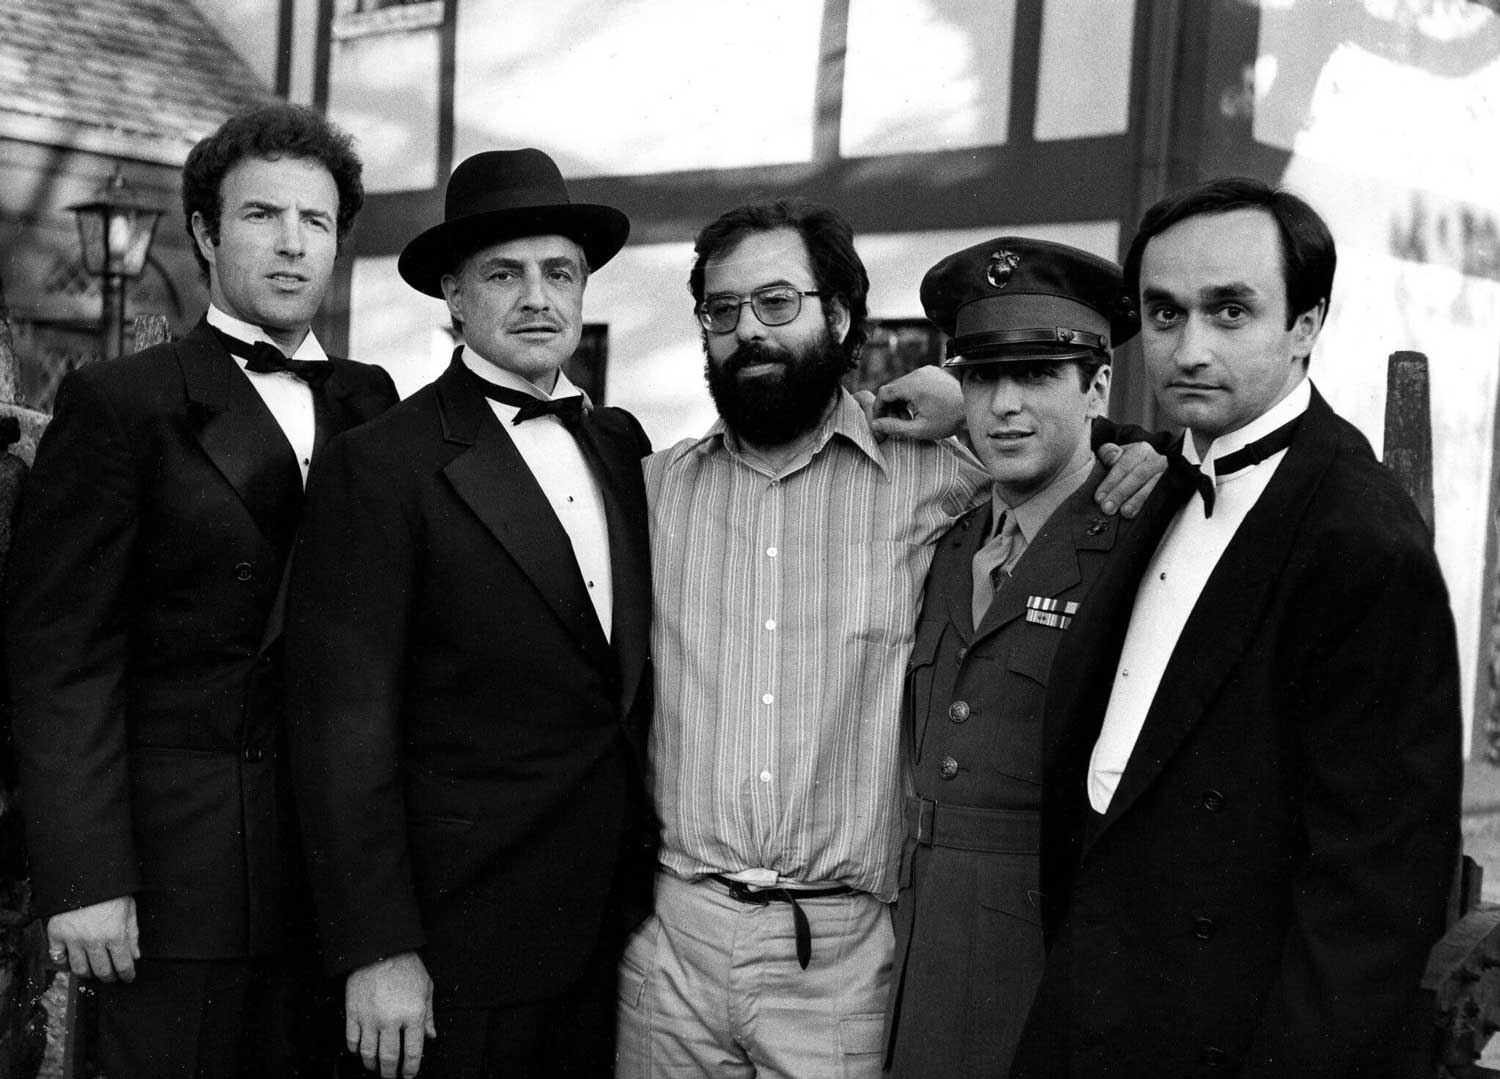 Coppola on set of the first “Godfather” with James Caan, left, Marlon Brando, Al Pacino and John Cazale (Image: Alamy)